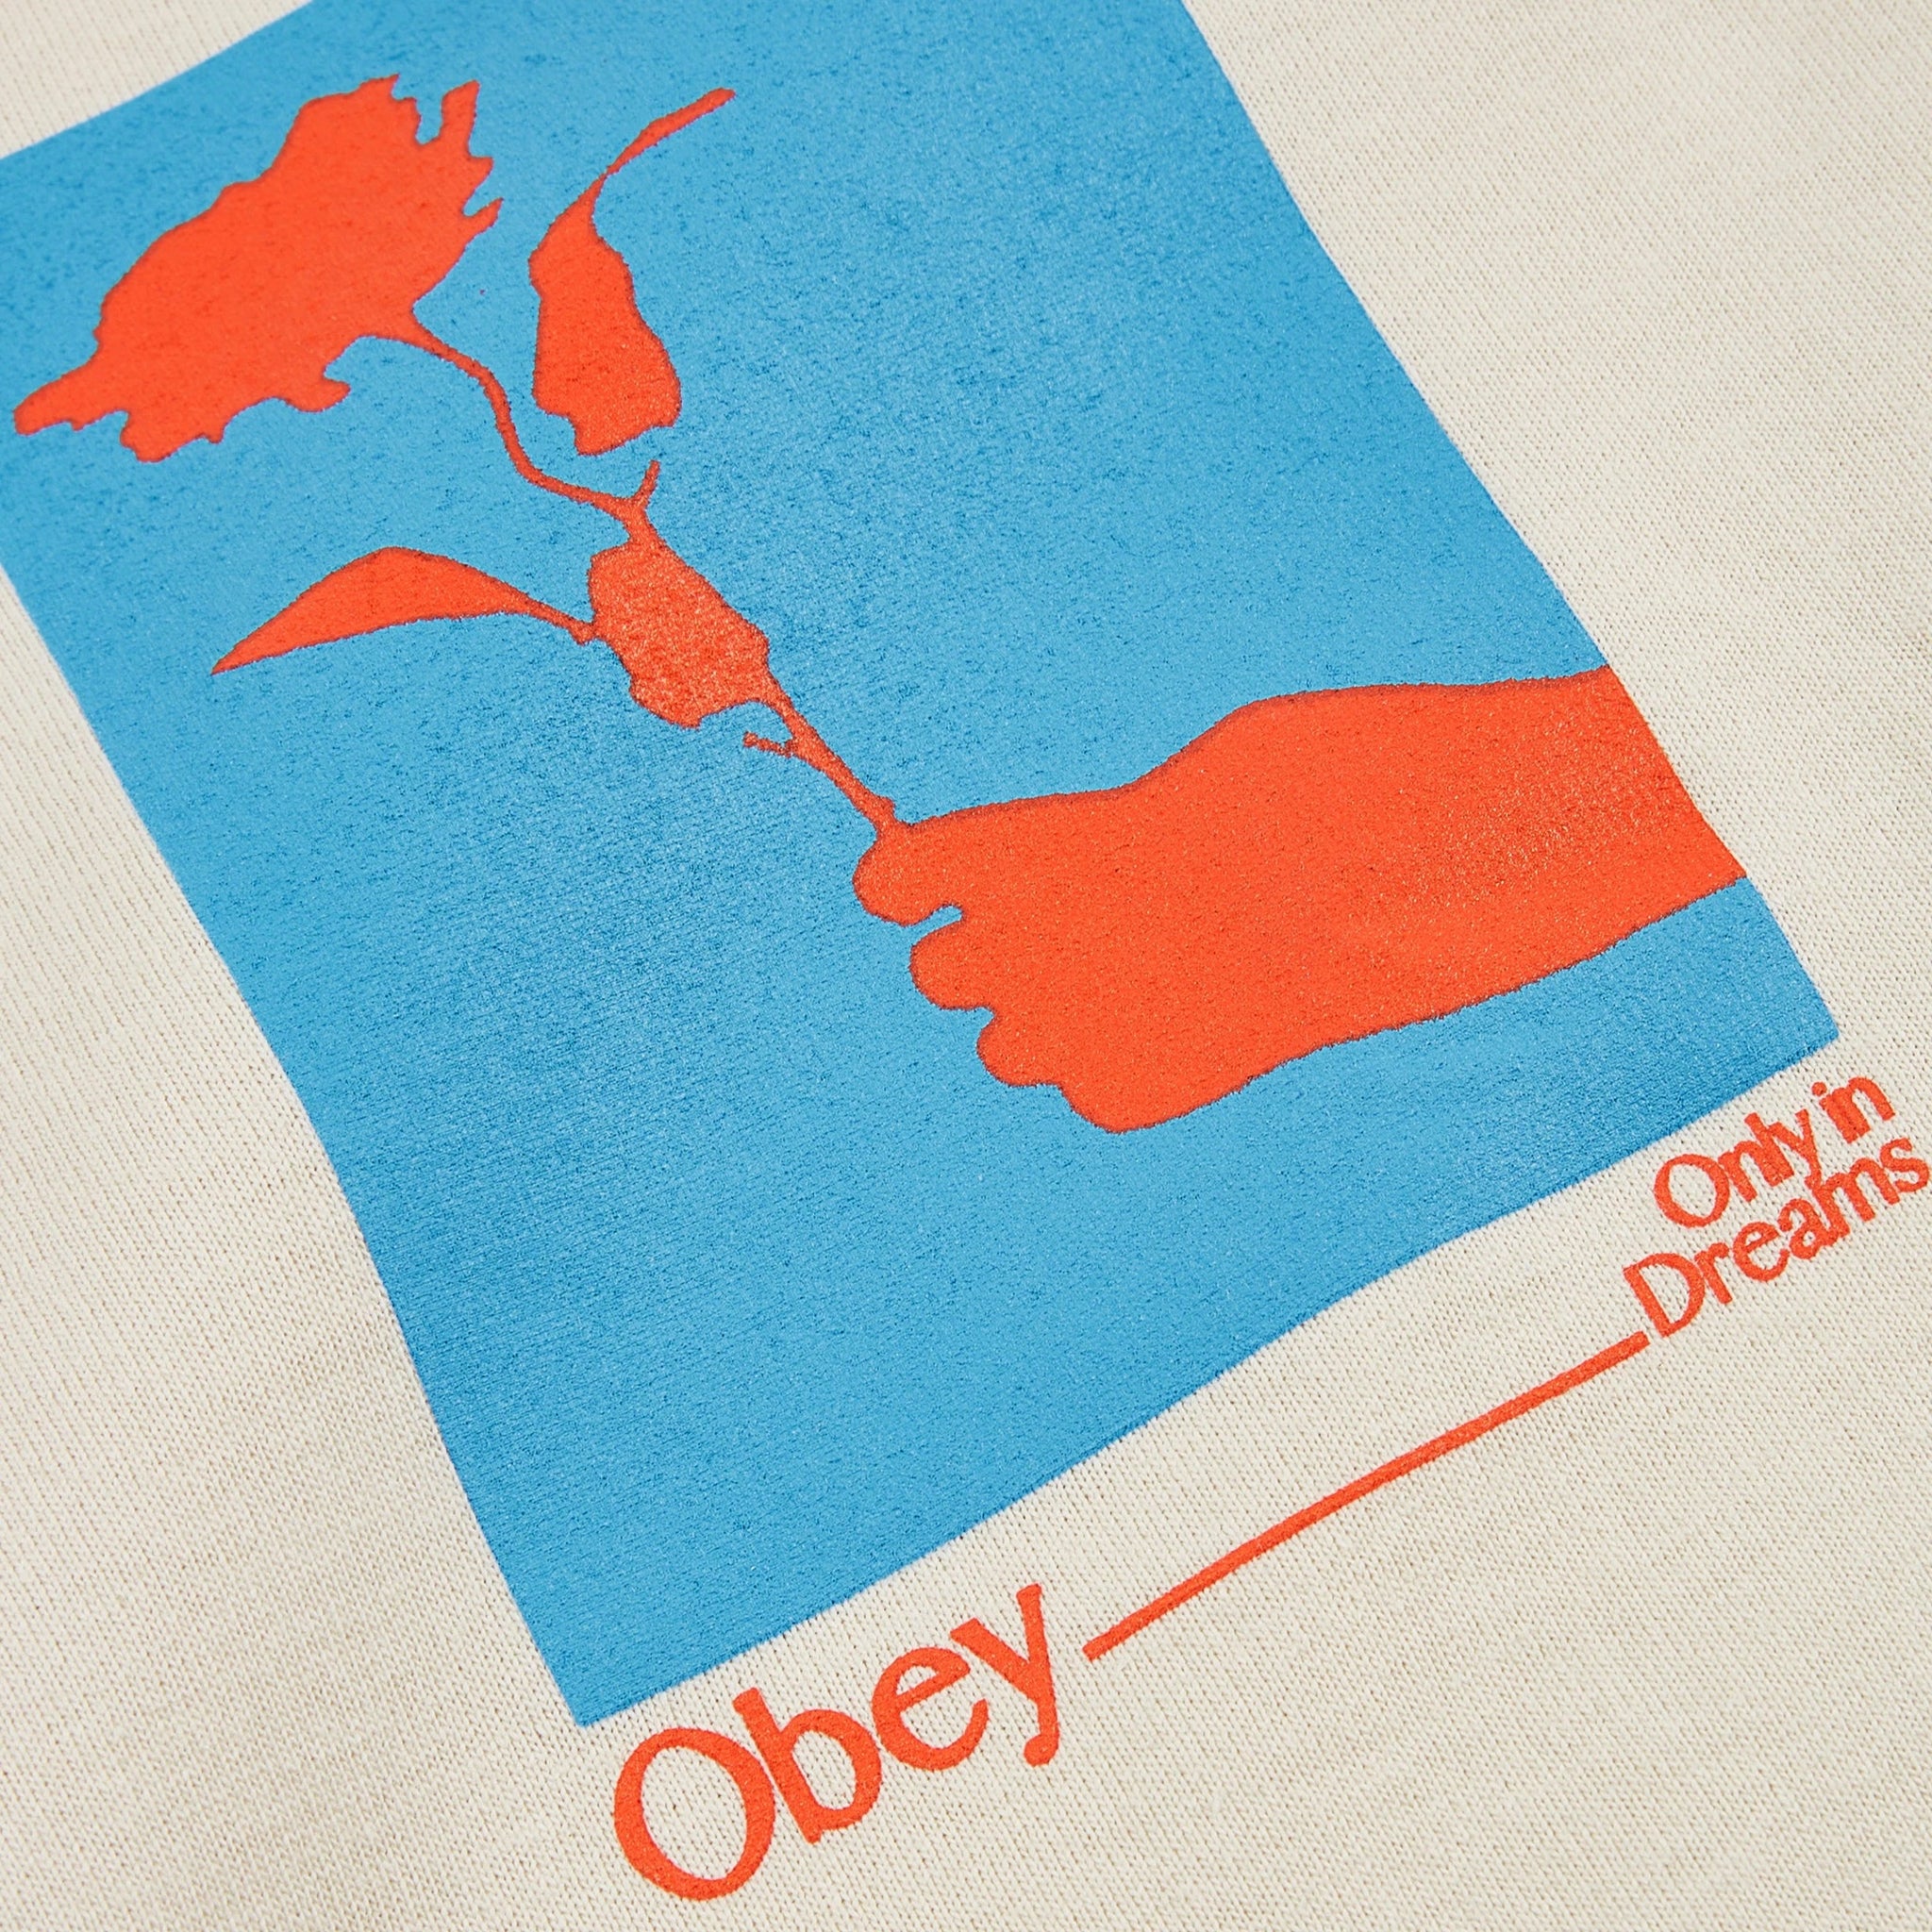 OBEY ONLY IN DREAMS